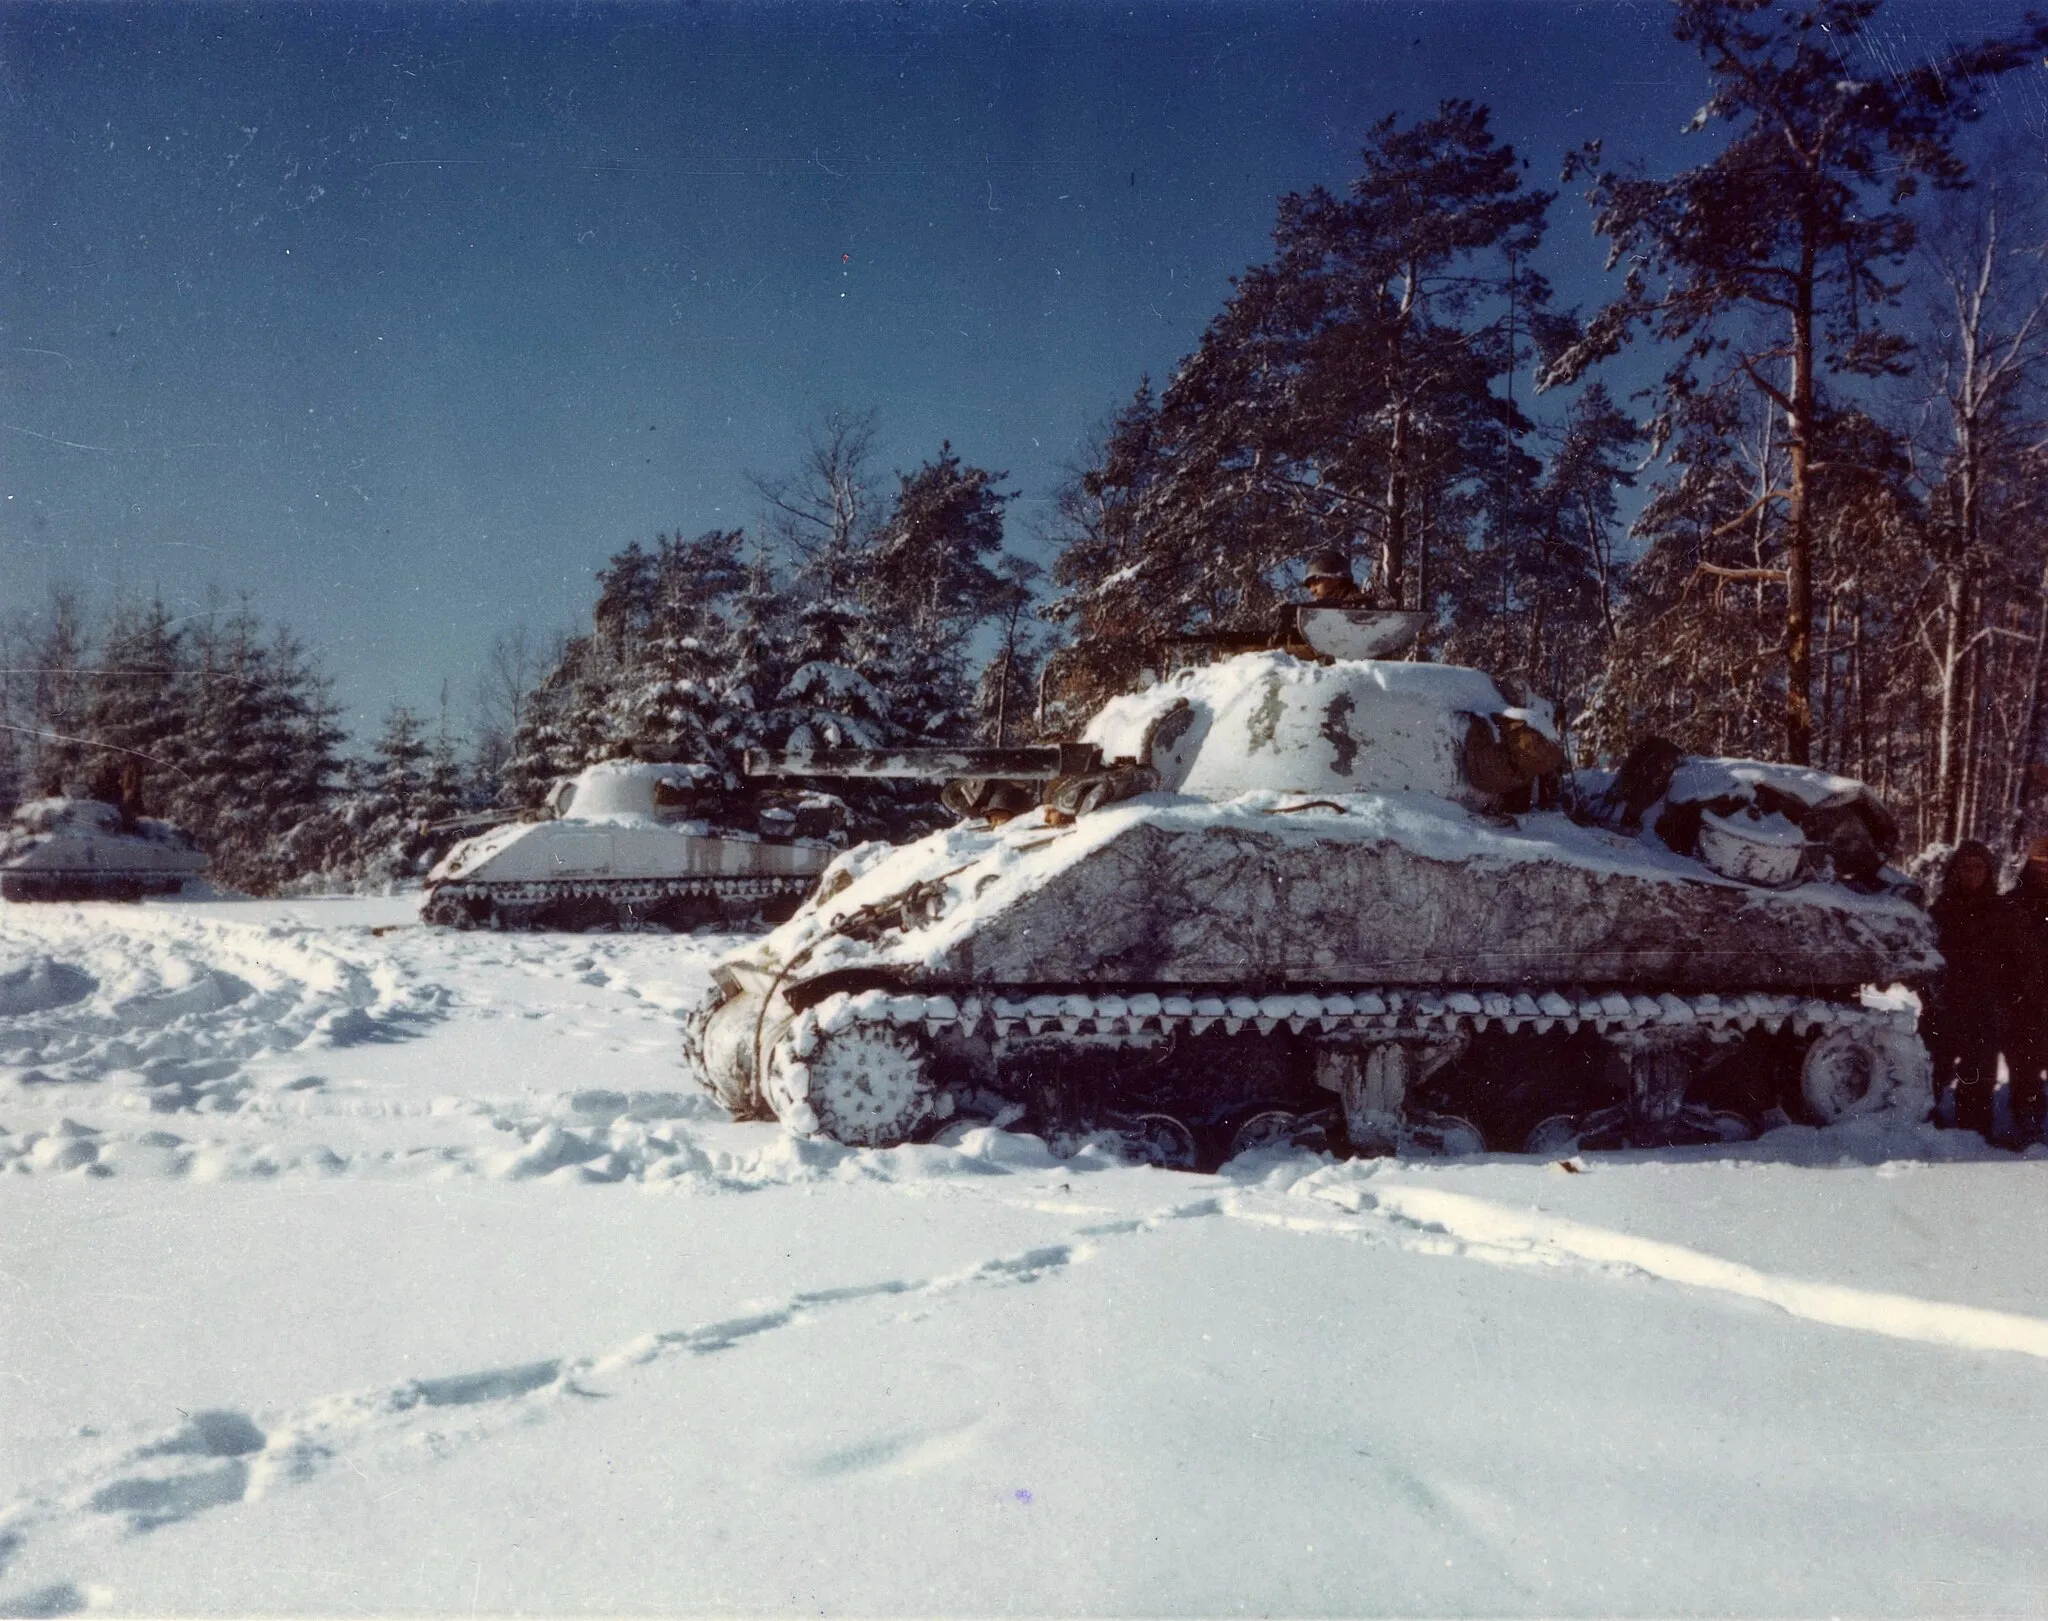 Photo showing: Original Caption: Lined up in a snow-covered field, near St. Vith, Belgium are the M-4 Sherman tanks of the 40th Tank Bn.
U.S. National Archives' Local Identifier: 111-C-714
Created by: Department of Defense. Department of the Army. Office of the Deputy Chief of Staff for Operations. U.S. Army Audiovisual Center. ca. 1974-5/15/1984
Scope and Content Note: Original caption: Lined up in a snow-covered field, near St. Vith, Belgium are the M-4 Sherman tanks of the10th Tank Bn.
Persistent URL: catalog.archives.gov/id/16730735
Repository: Still Pictures Unit, College Park,MD
Access Restrictions: Unrestricted

Use Restrictions: Unrestricted